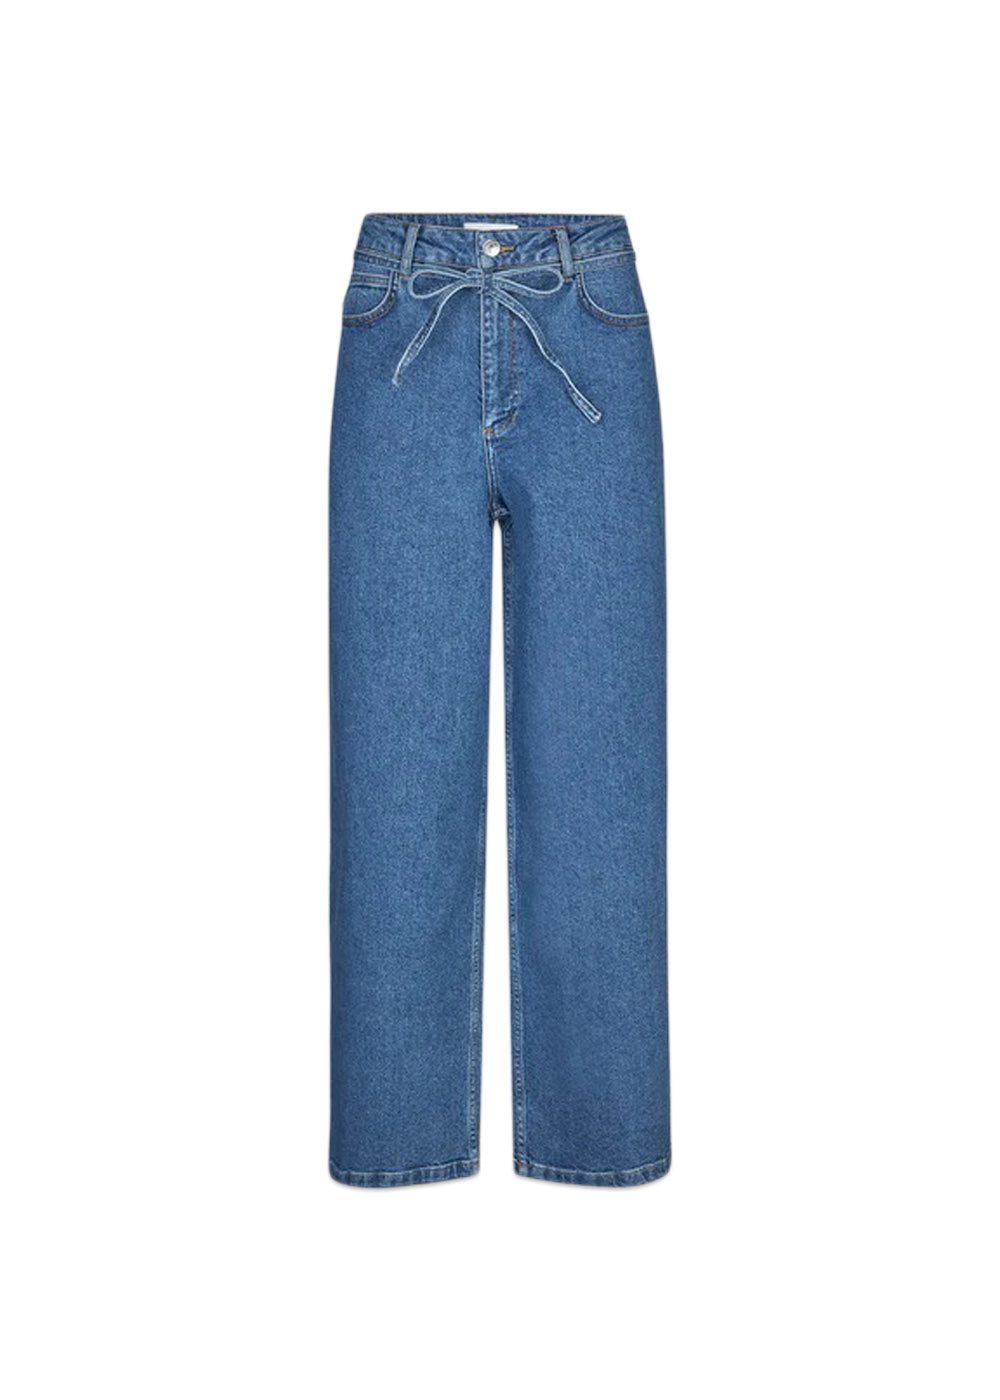 IsoldeMD solid pants - Distressed Blue